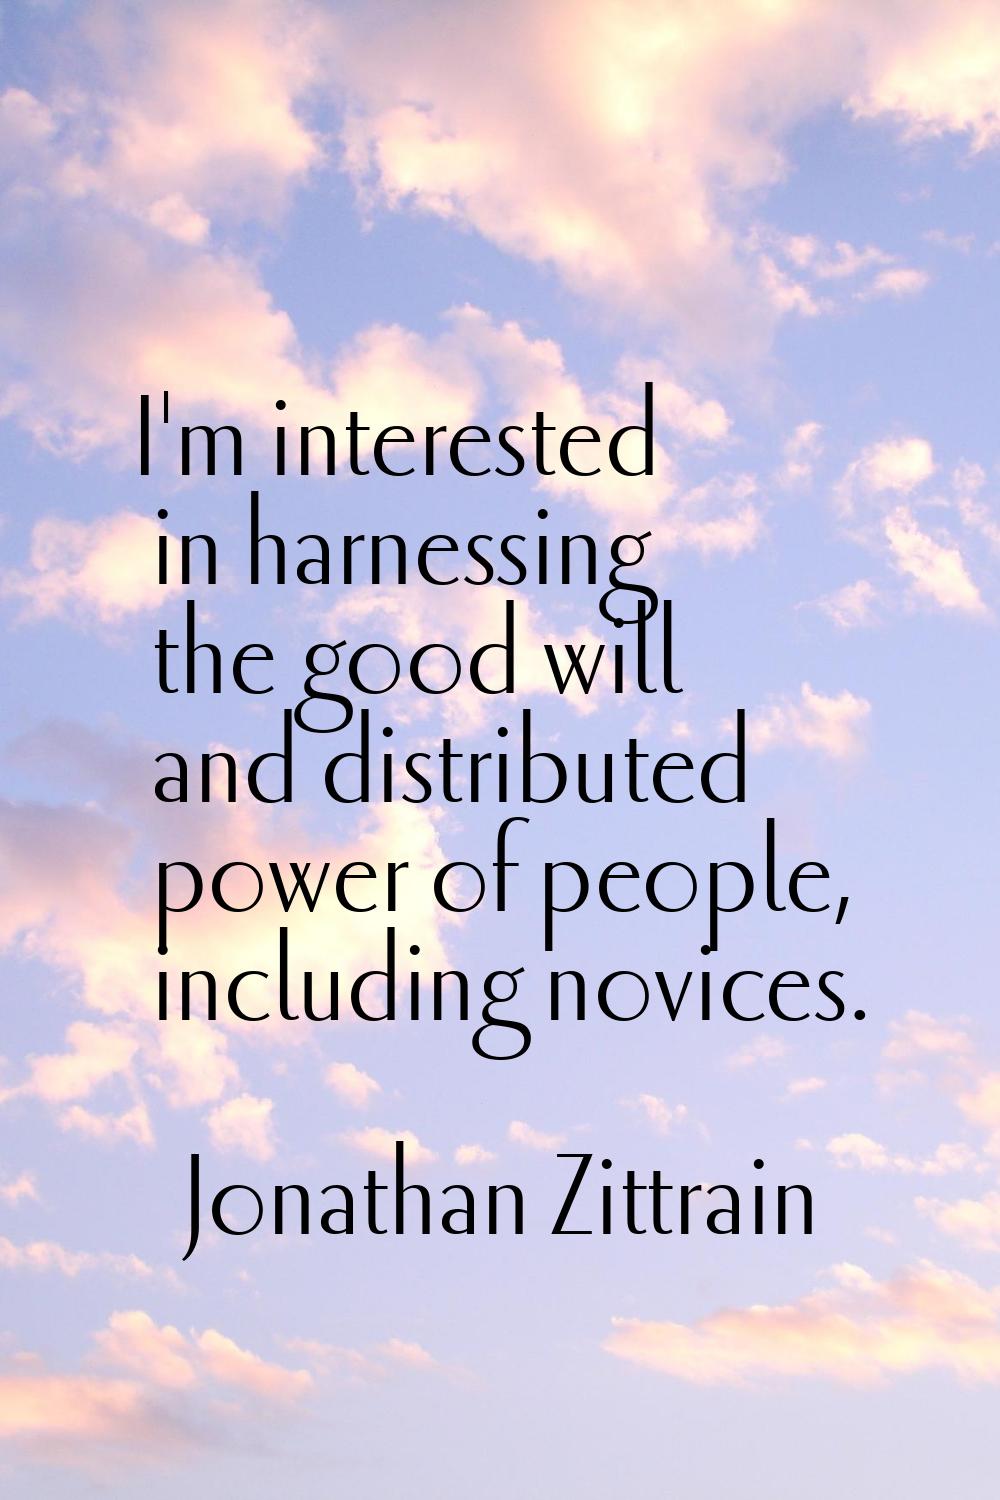 I'm interested in harnessing the good will and distributed power of people, including novices.